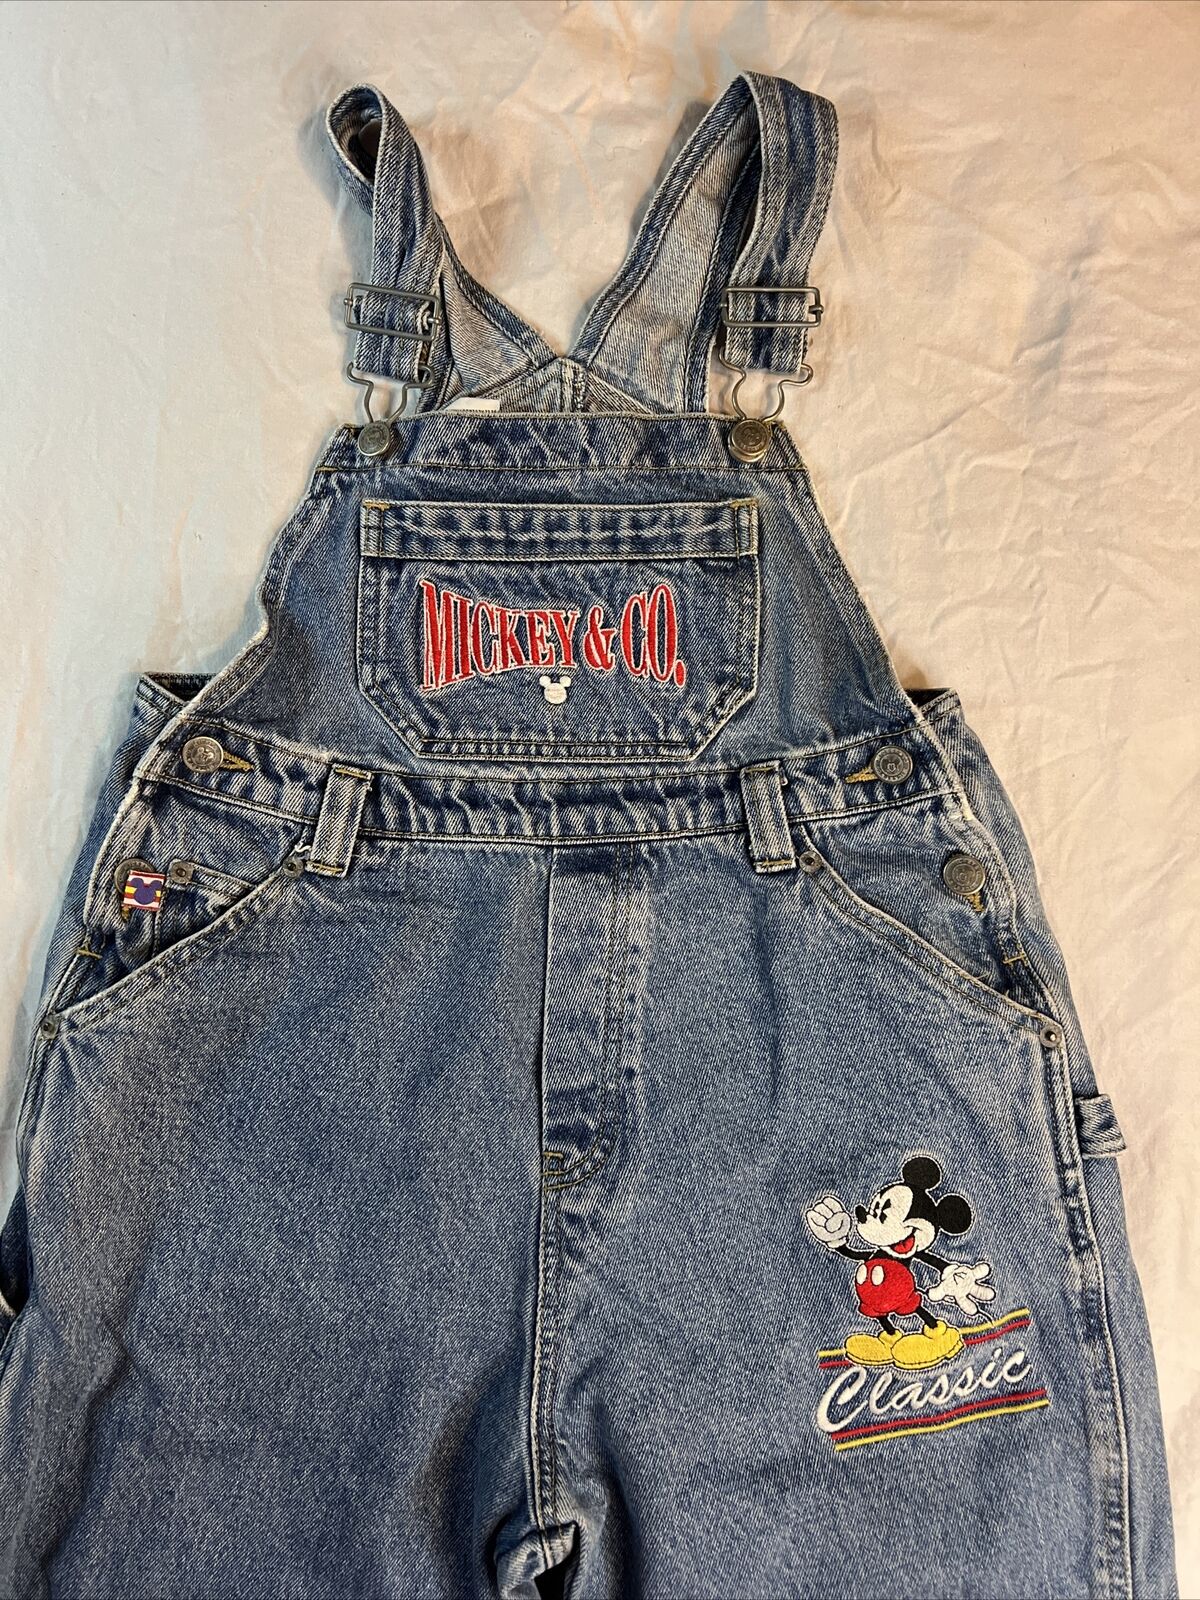 Vintage Disney Overalls Mickey & Co. Classic Mouse embroidery Size 12 Denim Bibs